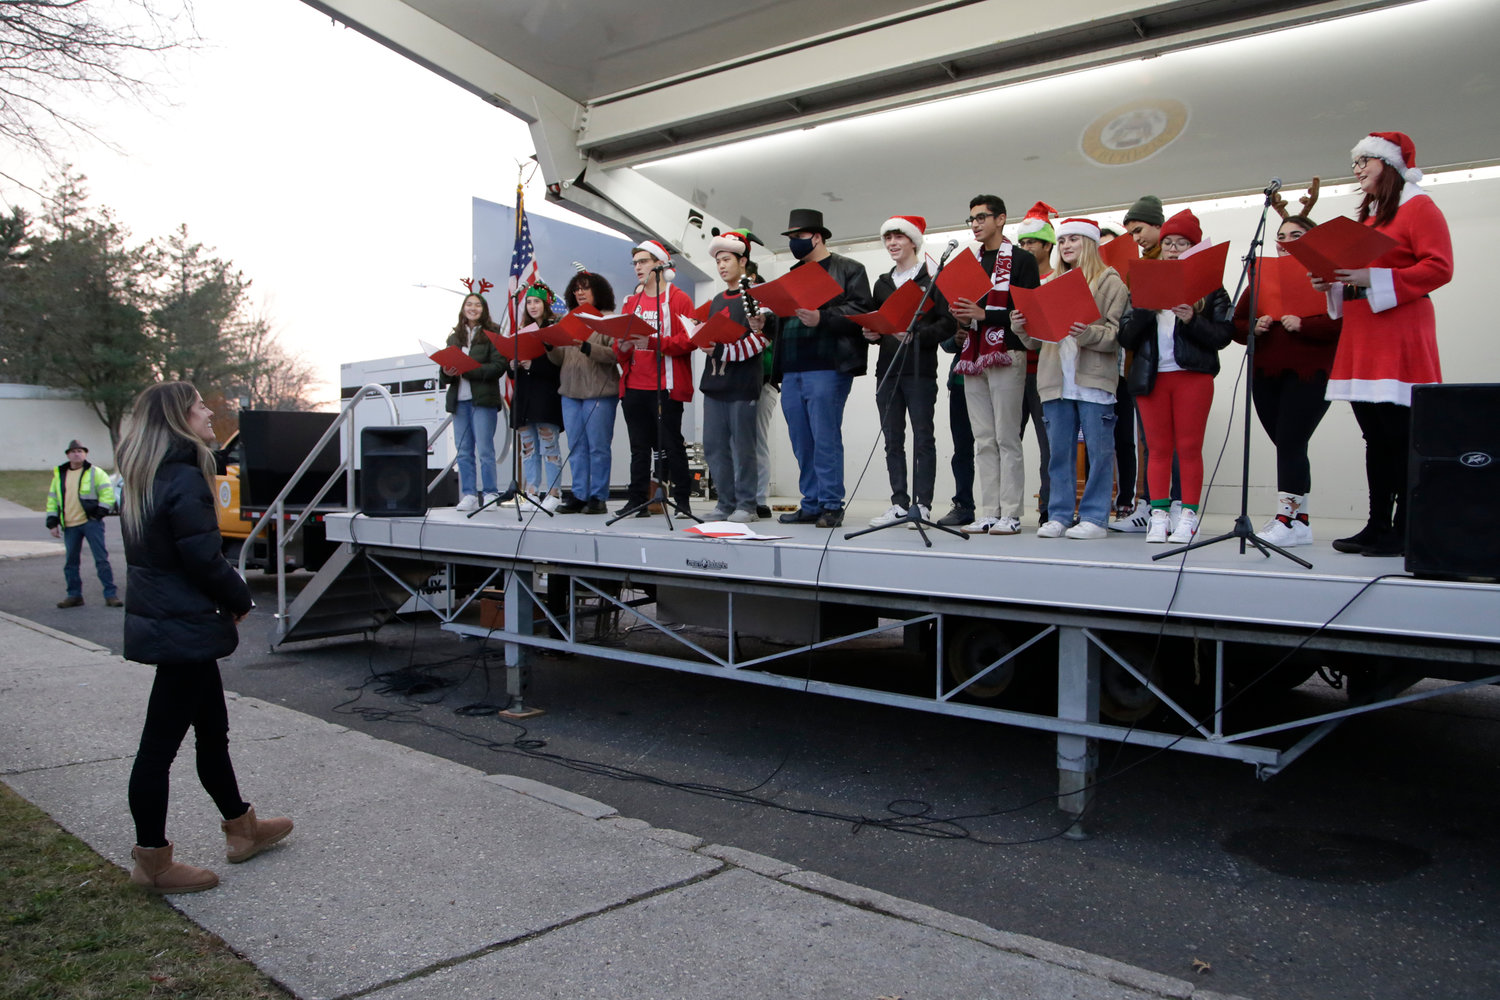 The Clarke select chorale, directed by Kaitlin Meiker, performed holiday songs at the Salisbury tree lighting last Friday.